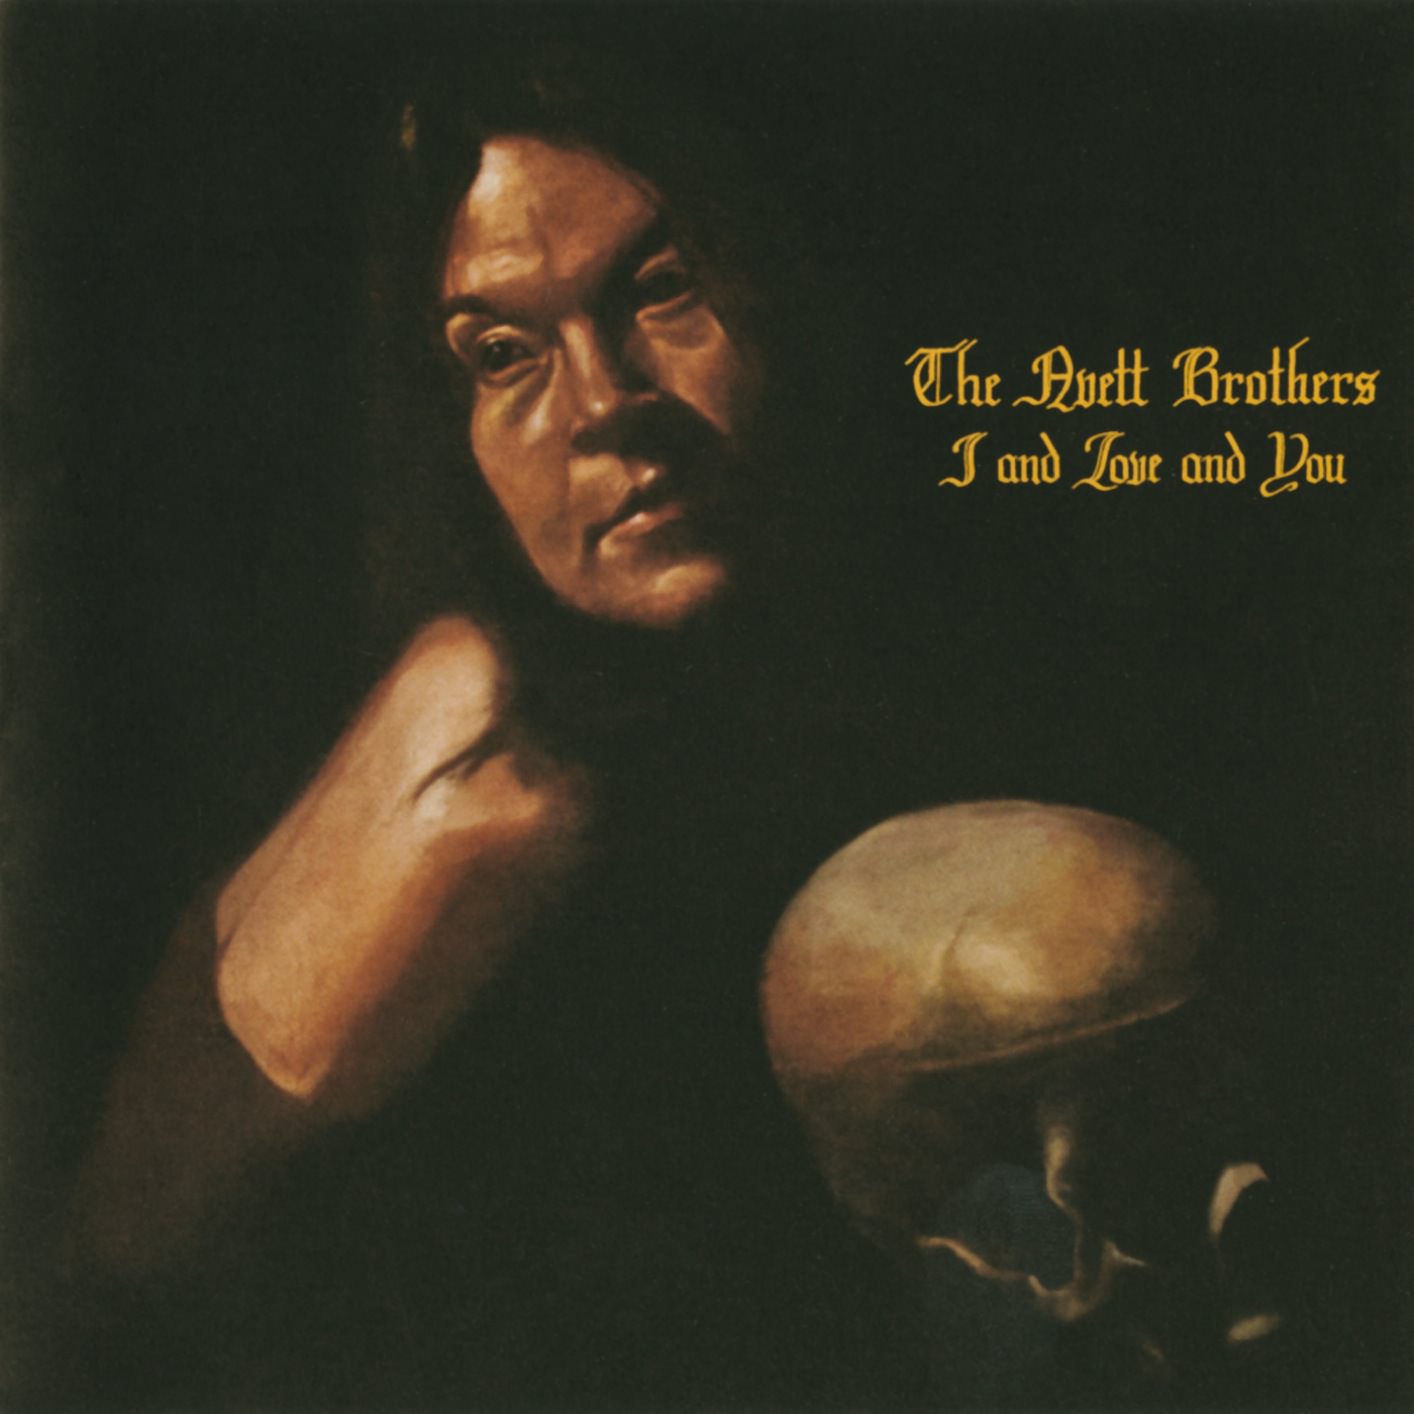 The Avett Brothers - I And Love And You (2009/2014) [Qobuz FLAC 24bit/96kHz]